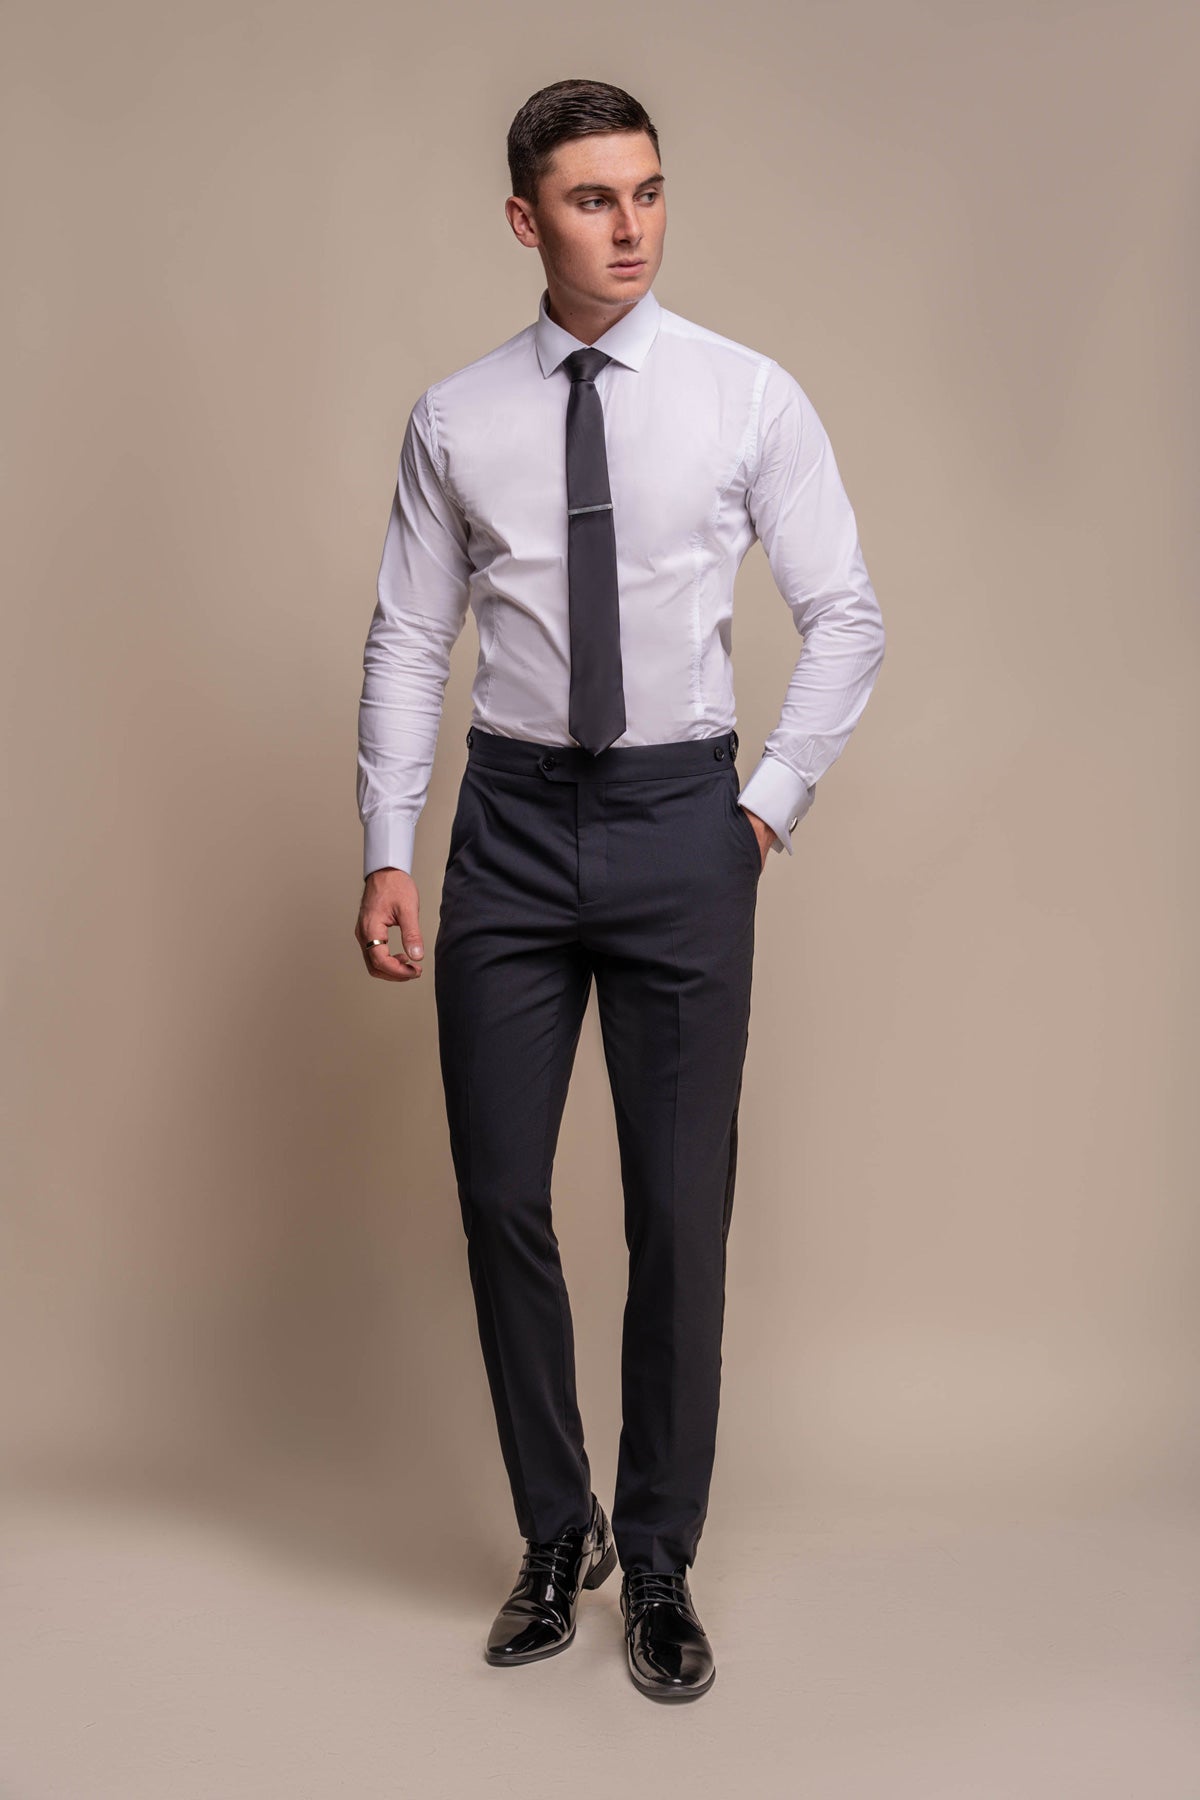 Aspen Midnight Navy Tuxedo Trousers - Trousers - 28R - Swagger & Swoon